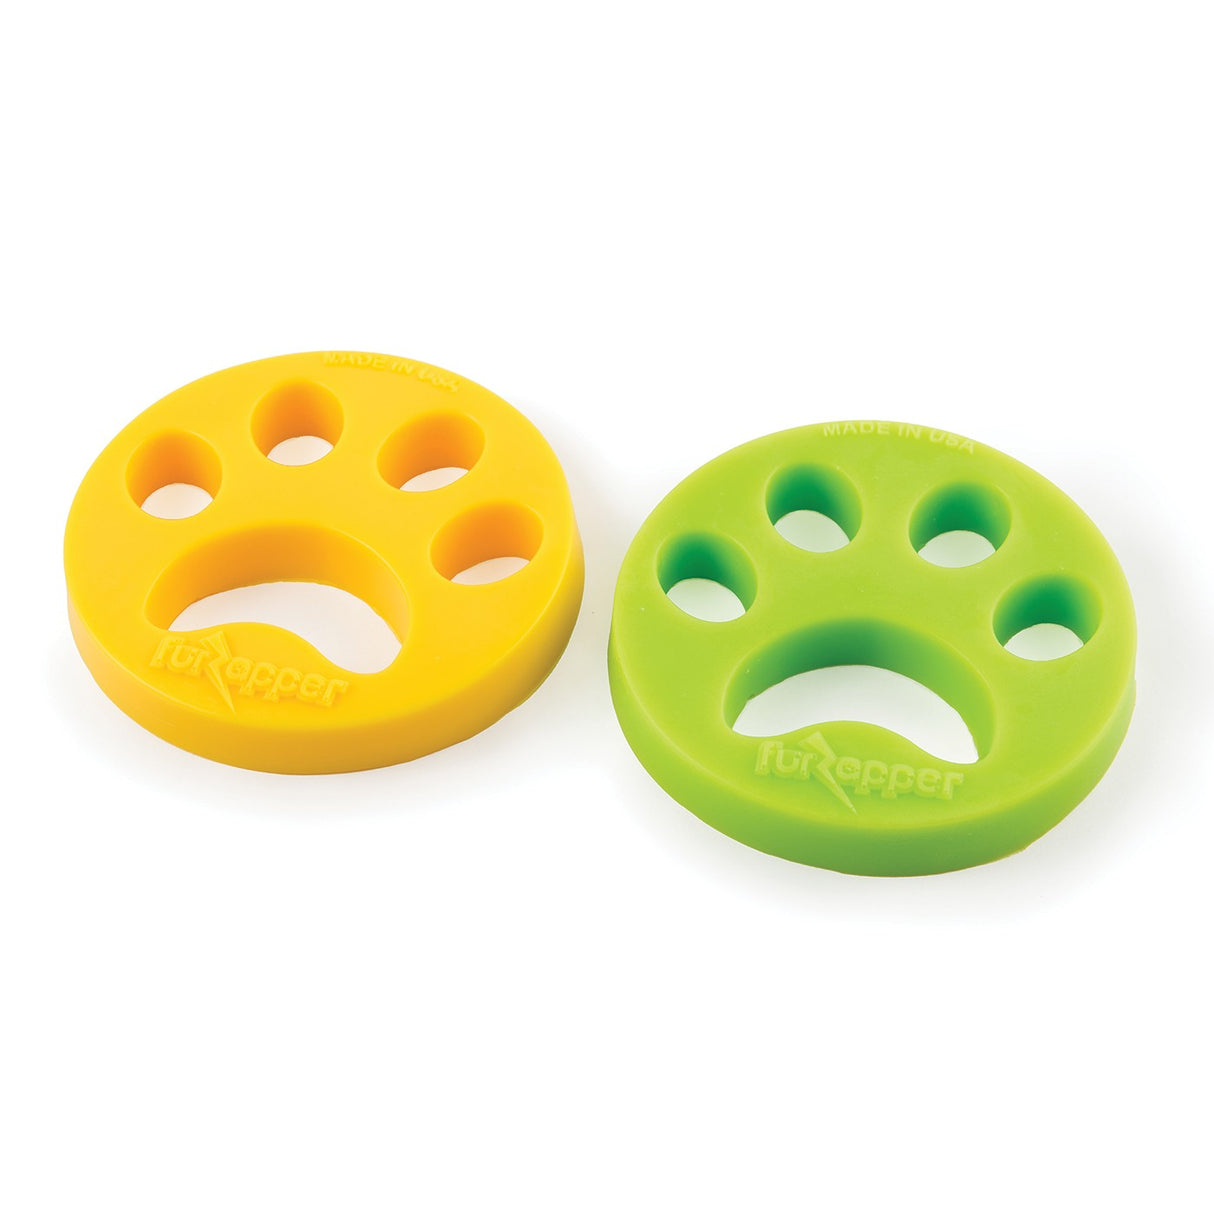 FurZapper Pet Hair Remover - 2 Pack